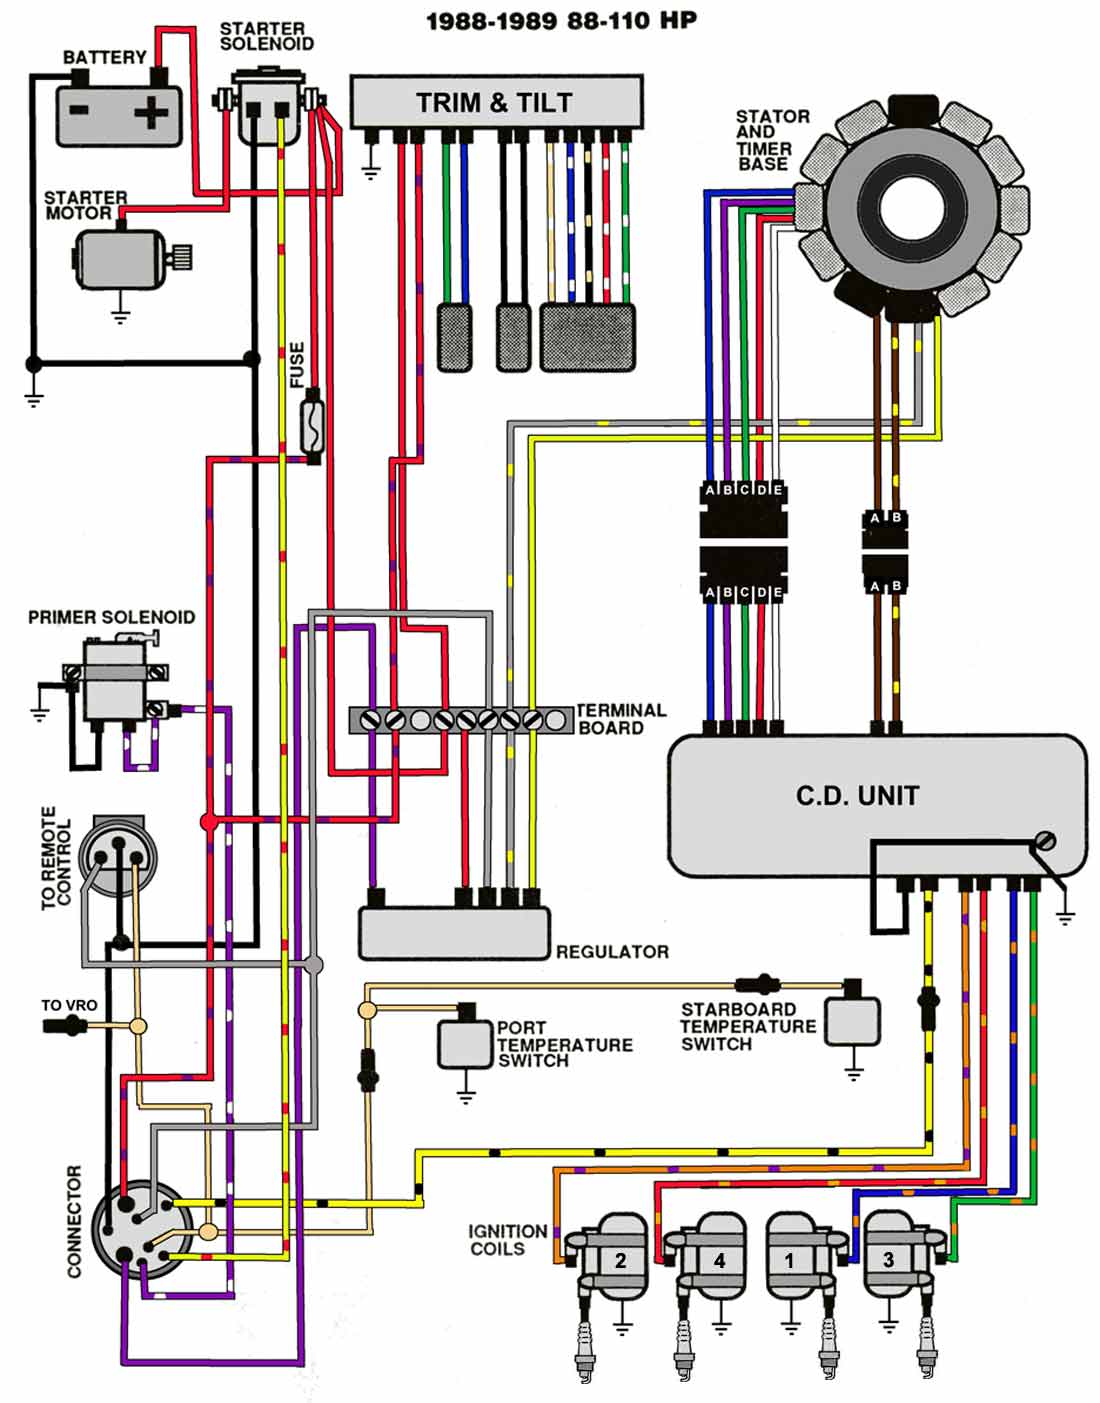 Ignition Switch Wiring Suzuki Outboard Wiring Harness Diagram from www.maxrules.com